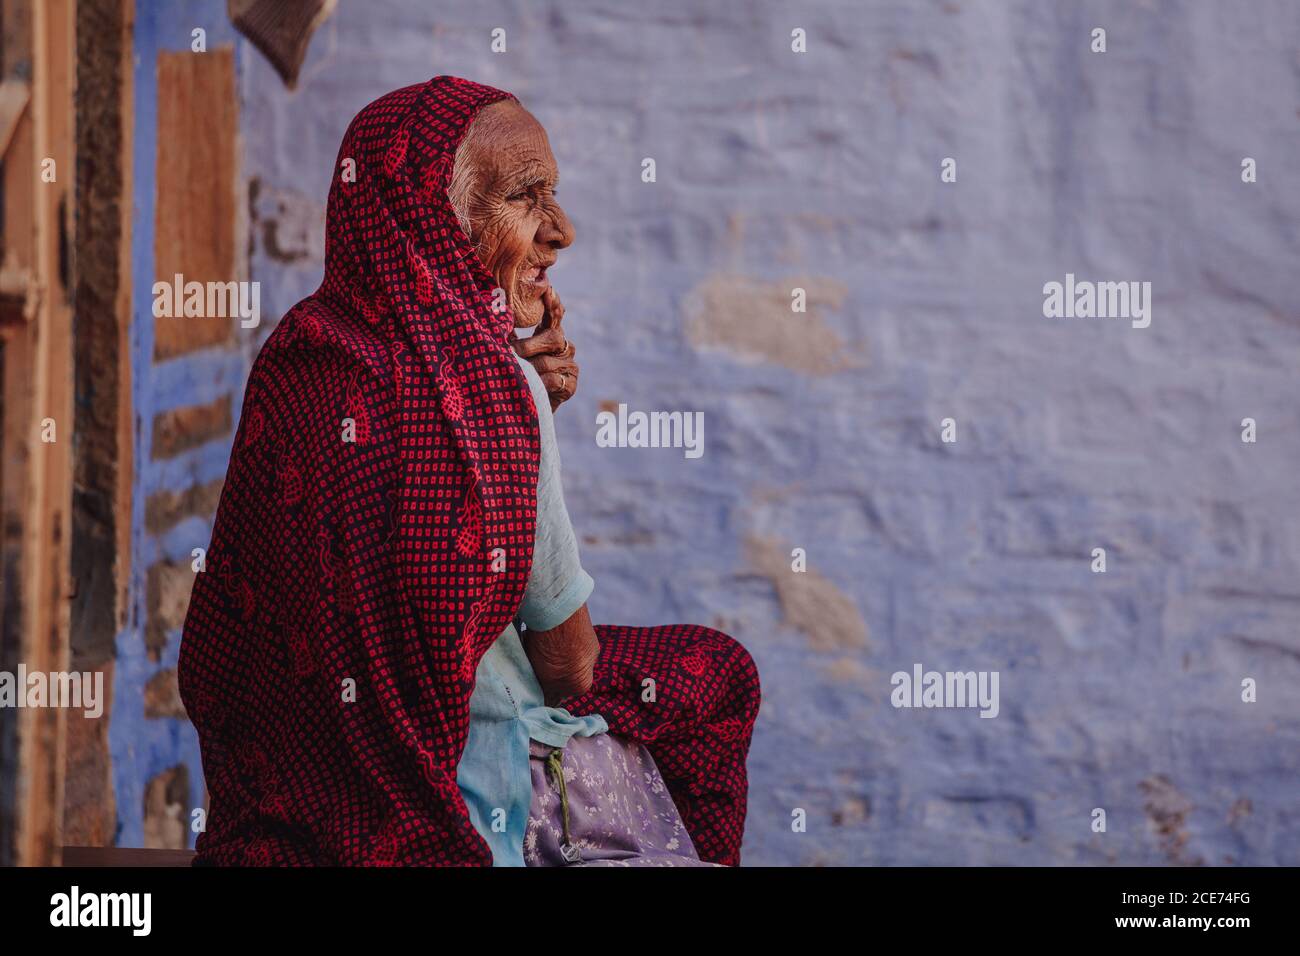 India - October 30, 2012: Side view of senior Indian female in traditional wear standing near shabby stone building and looking away Stock Photo